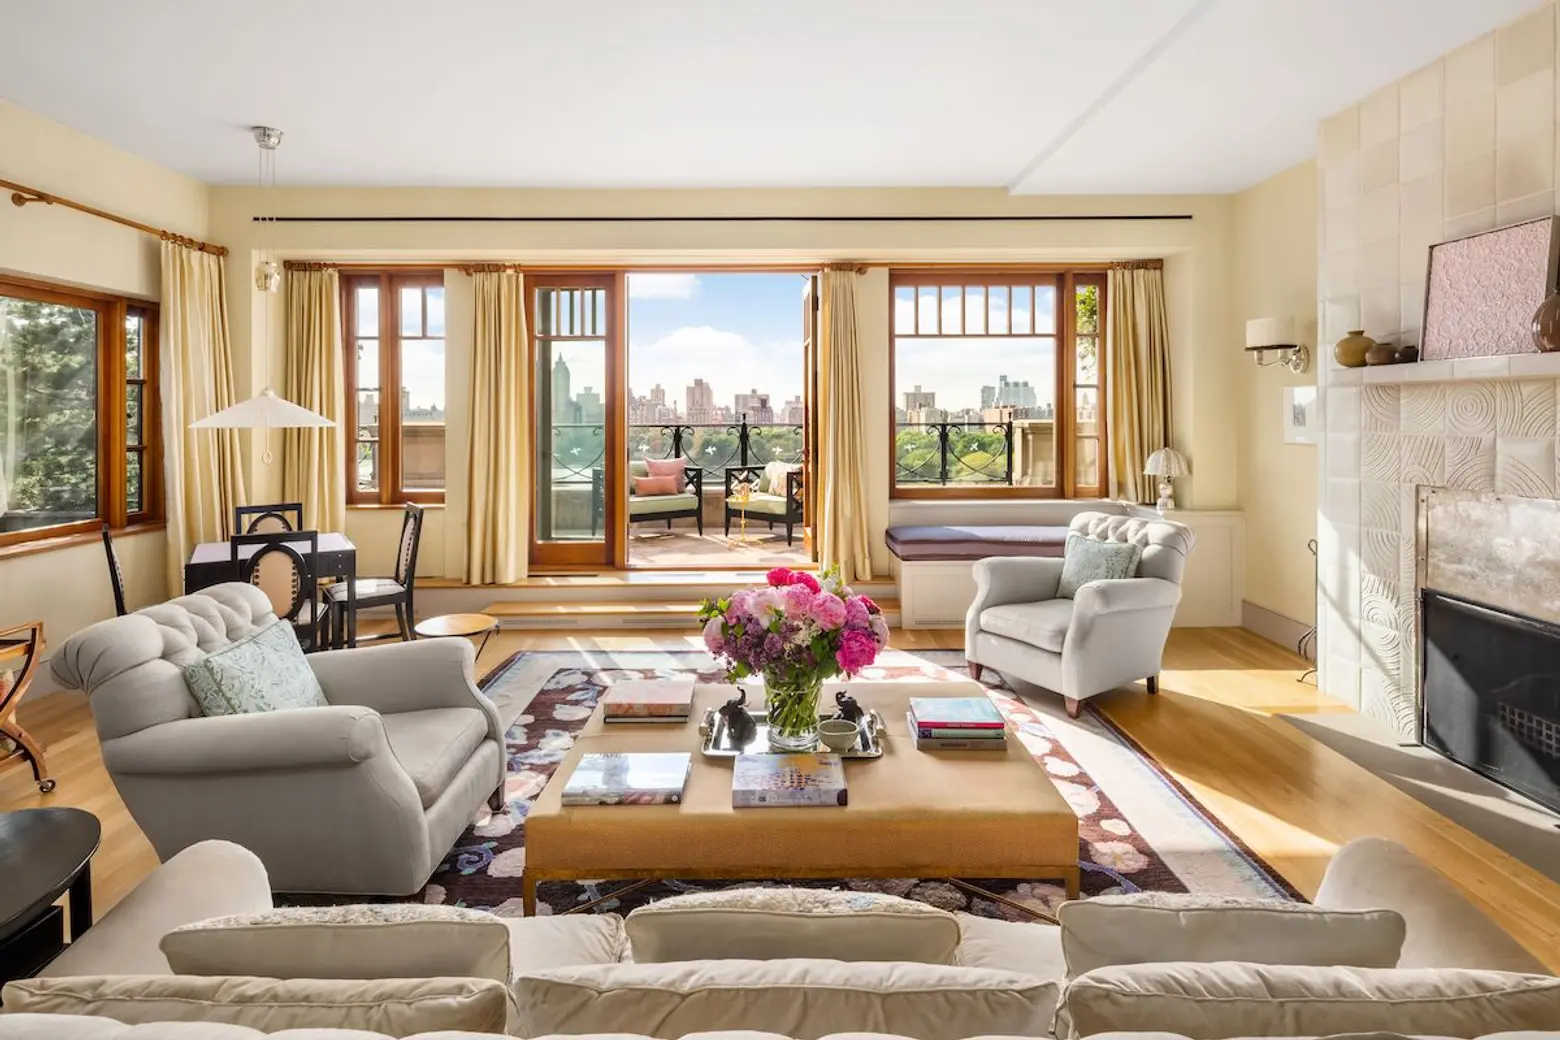 Bette Midler sells palatial Upper East Side penthouse last listed for $50M